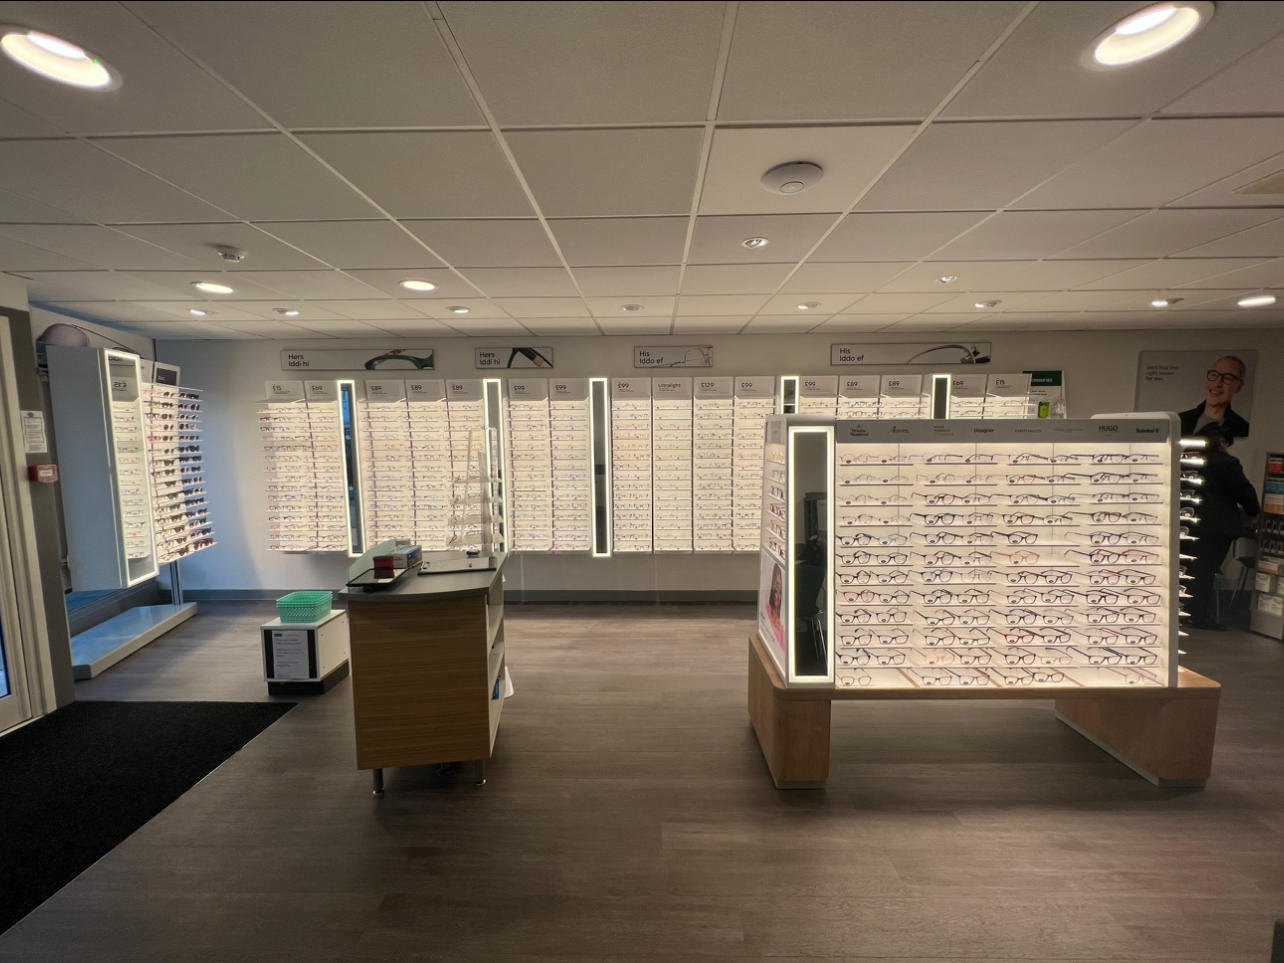 Specsavers Mold Specsavers Opticians and Audiologists - Mold Mold 01352 705090